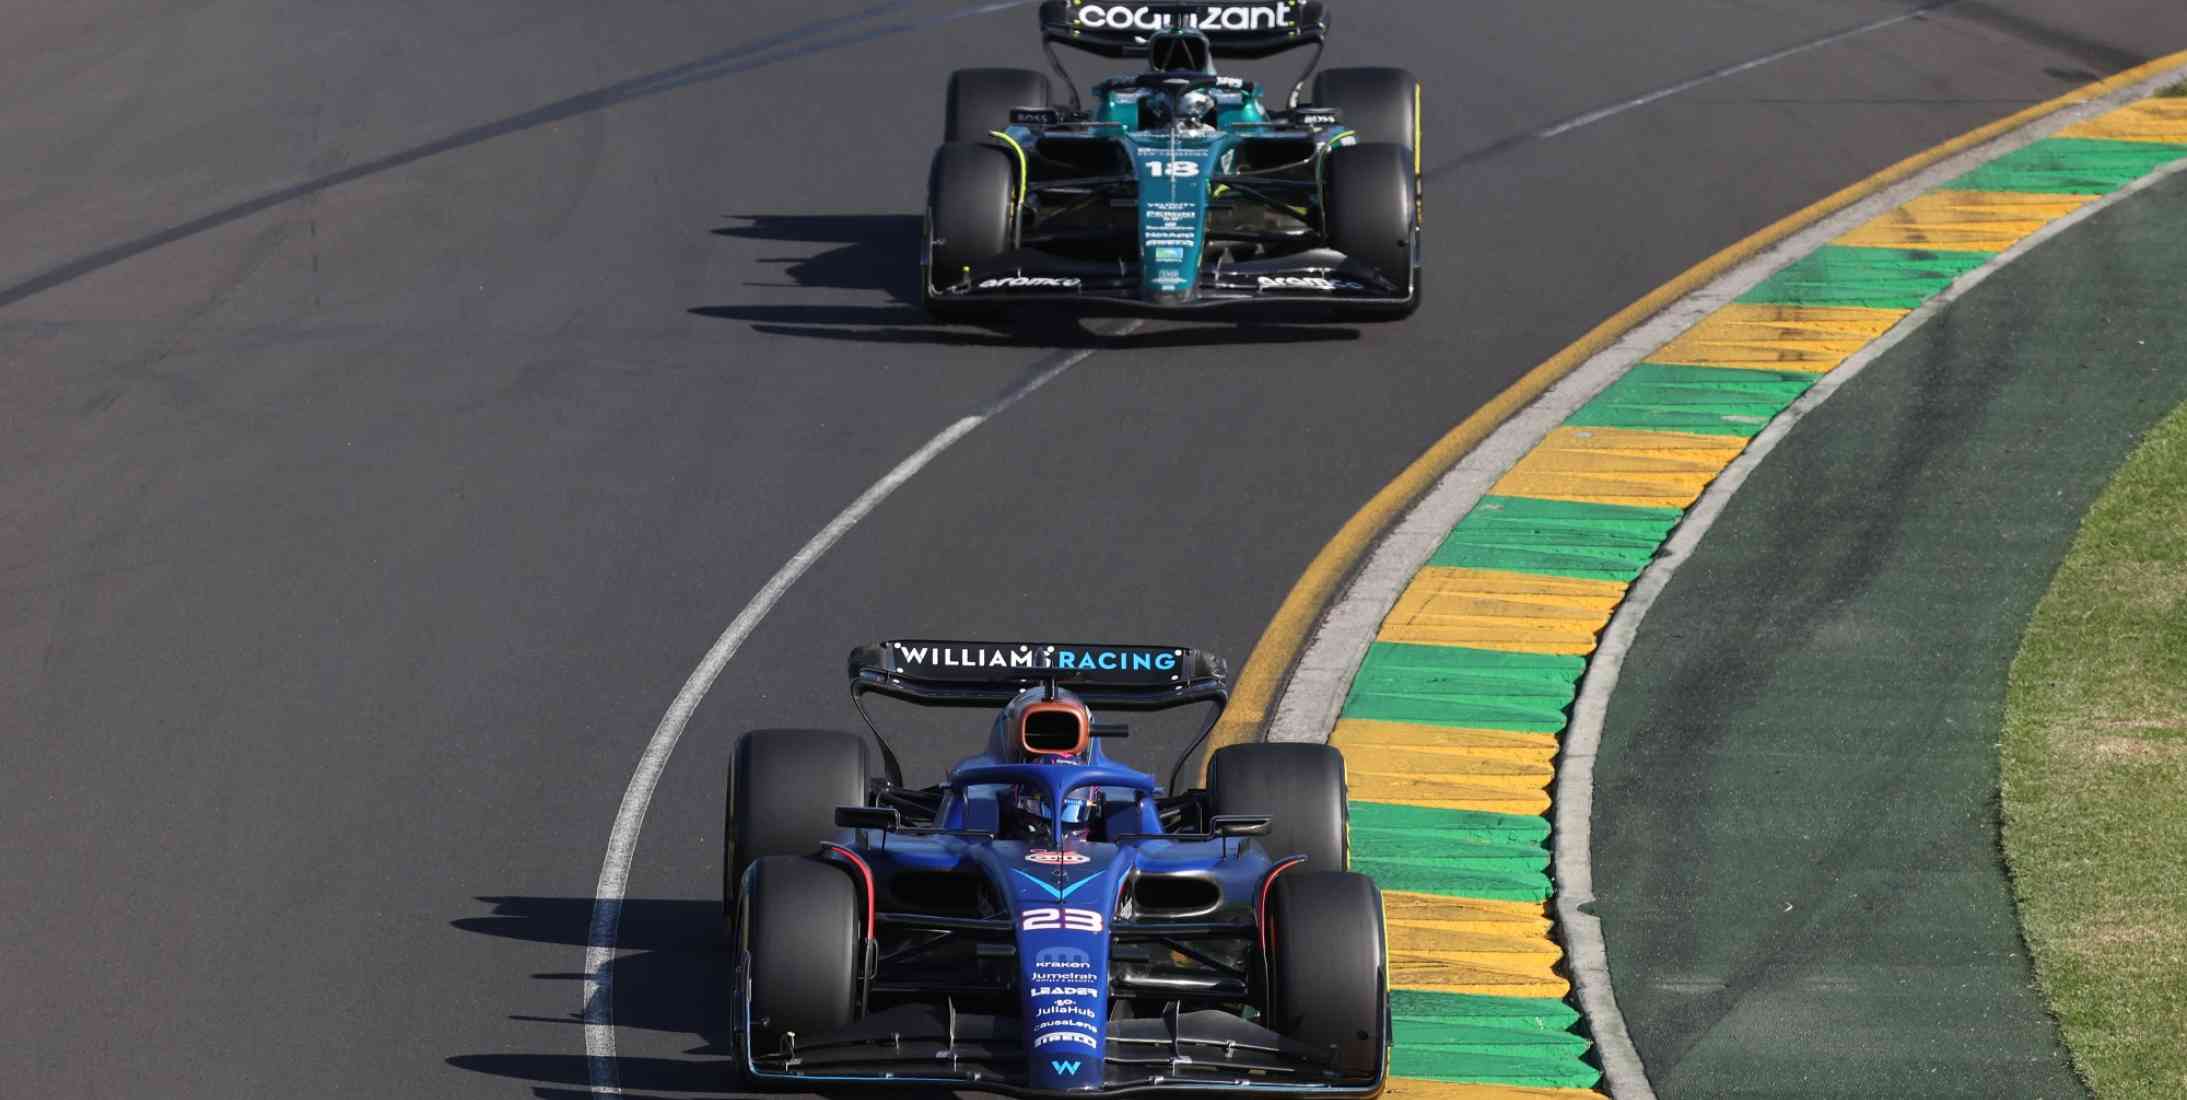 Williams F1 driver Alexander Albon from Thailand and Lance Stroll of Aston Martin F1 drive around the Albert Park Street Circuit in Melbourne Australia during the 2023 Australian Grand Prix